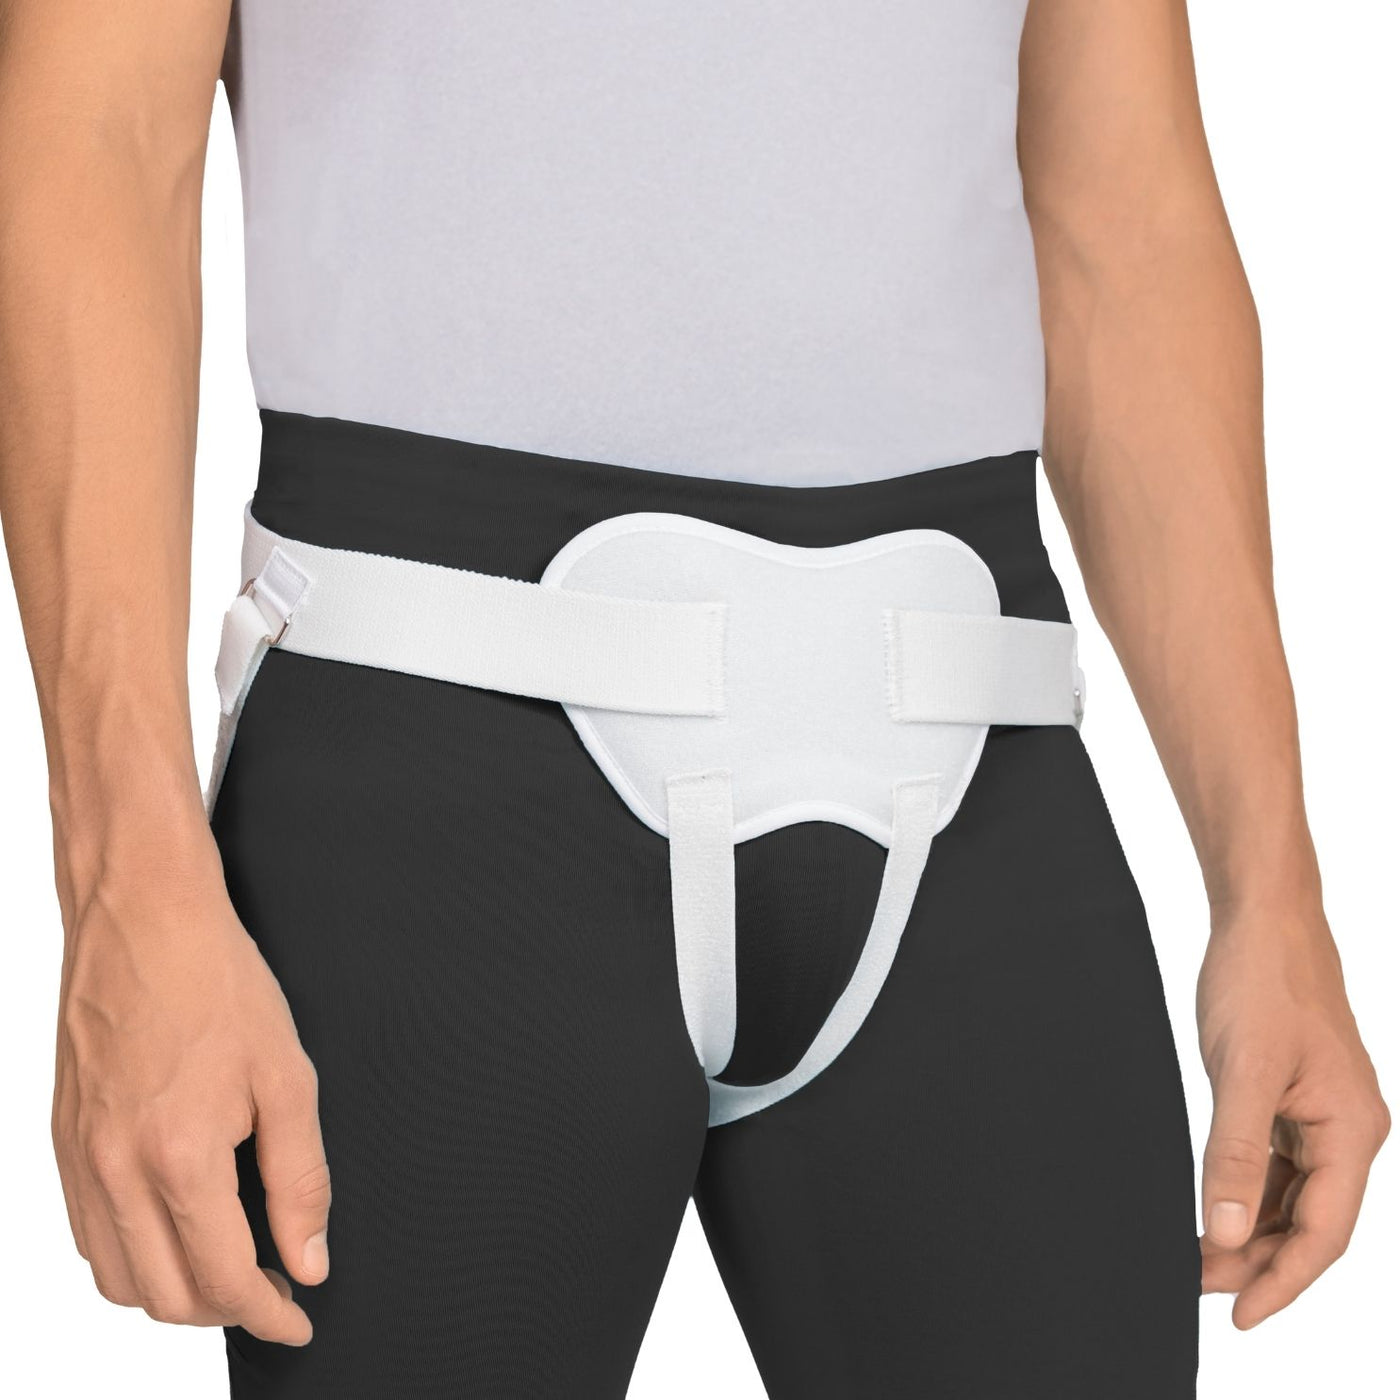 Groin Support Truss | Best Inguinal Hernia Belt for Males